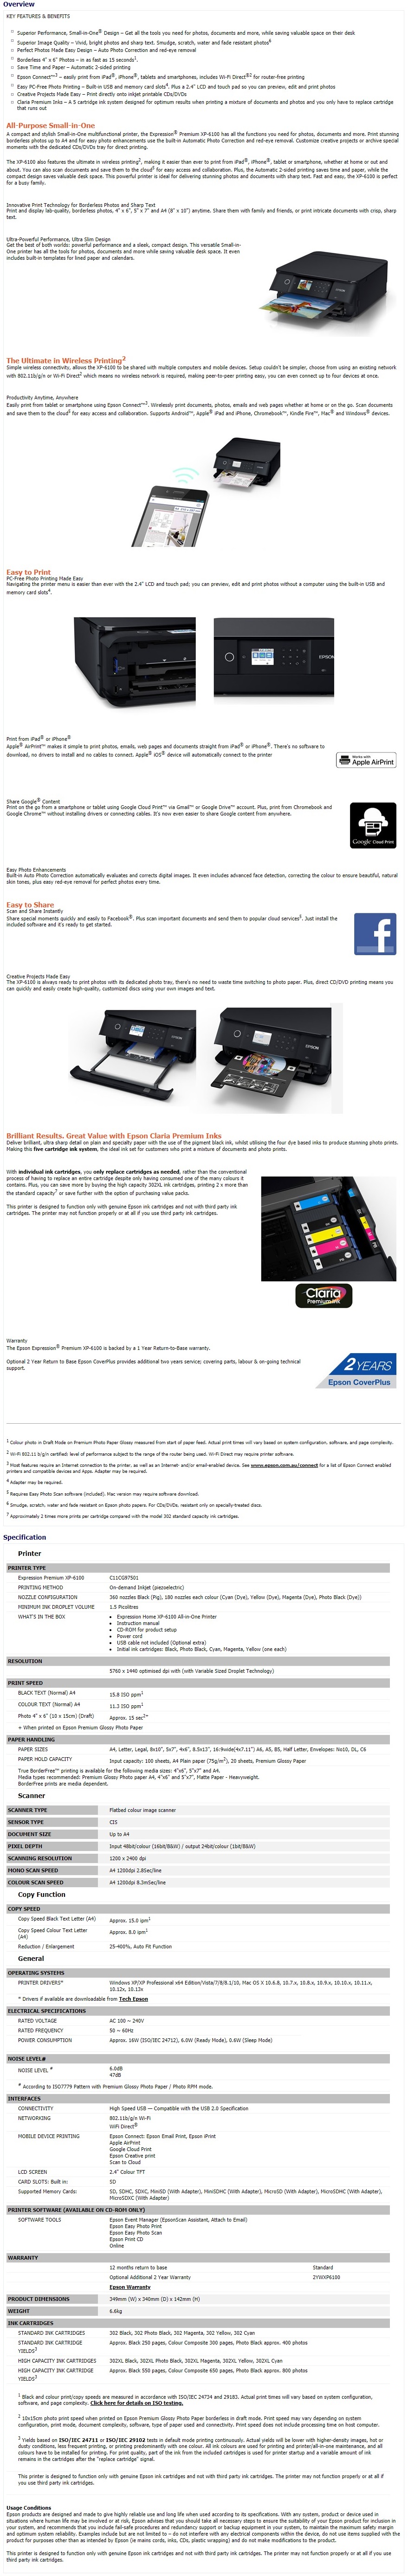 A large marketing image providing additional information about the product Epson Expression Photo XP-6100 Multifunction Wireless Printer - Additional alt info not provided